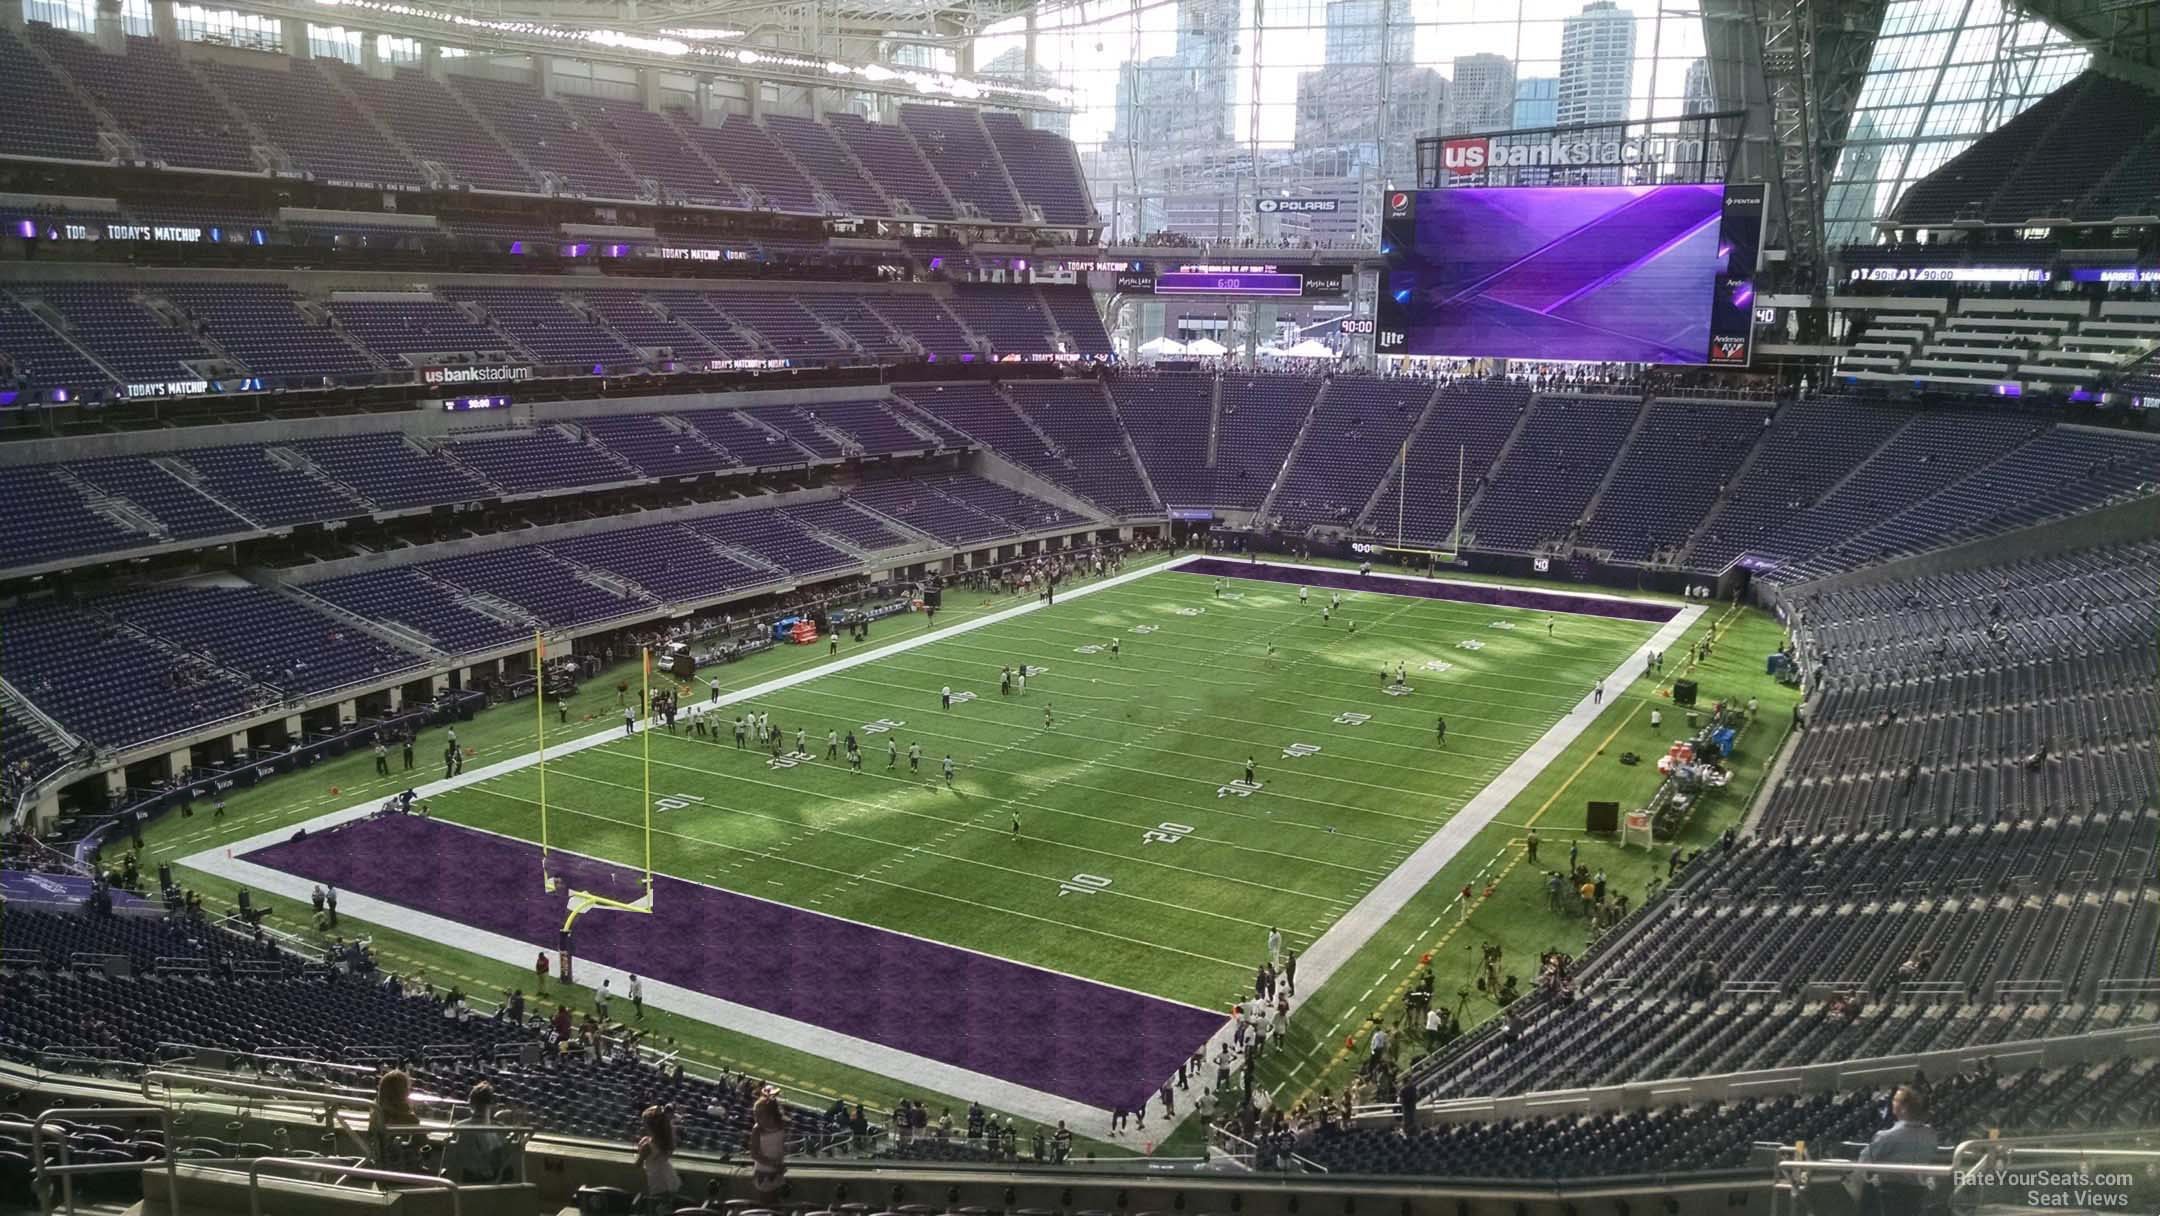 section 220, row 15 seat view  for football - u.s. bank stadium